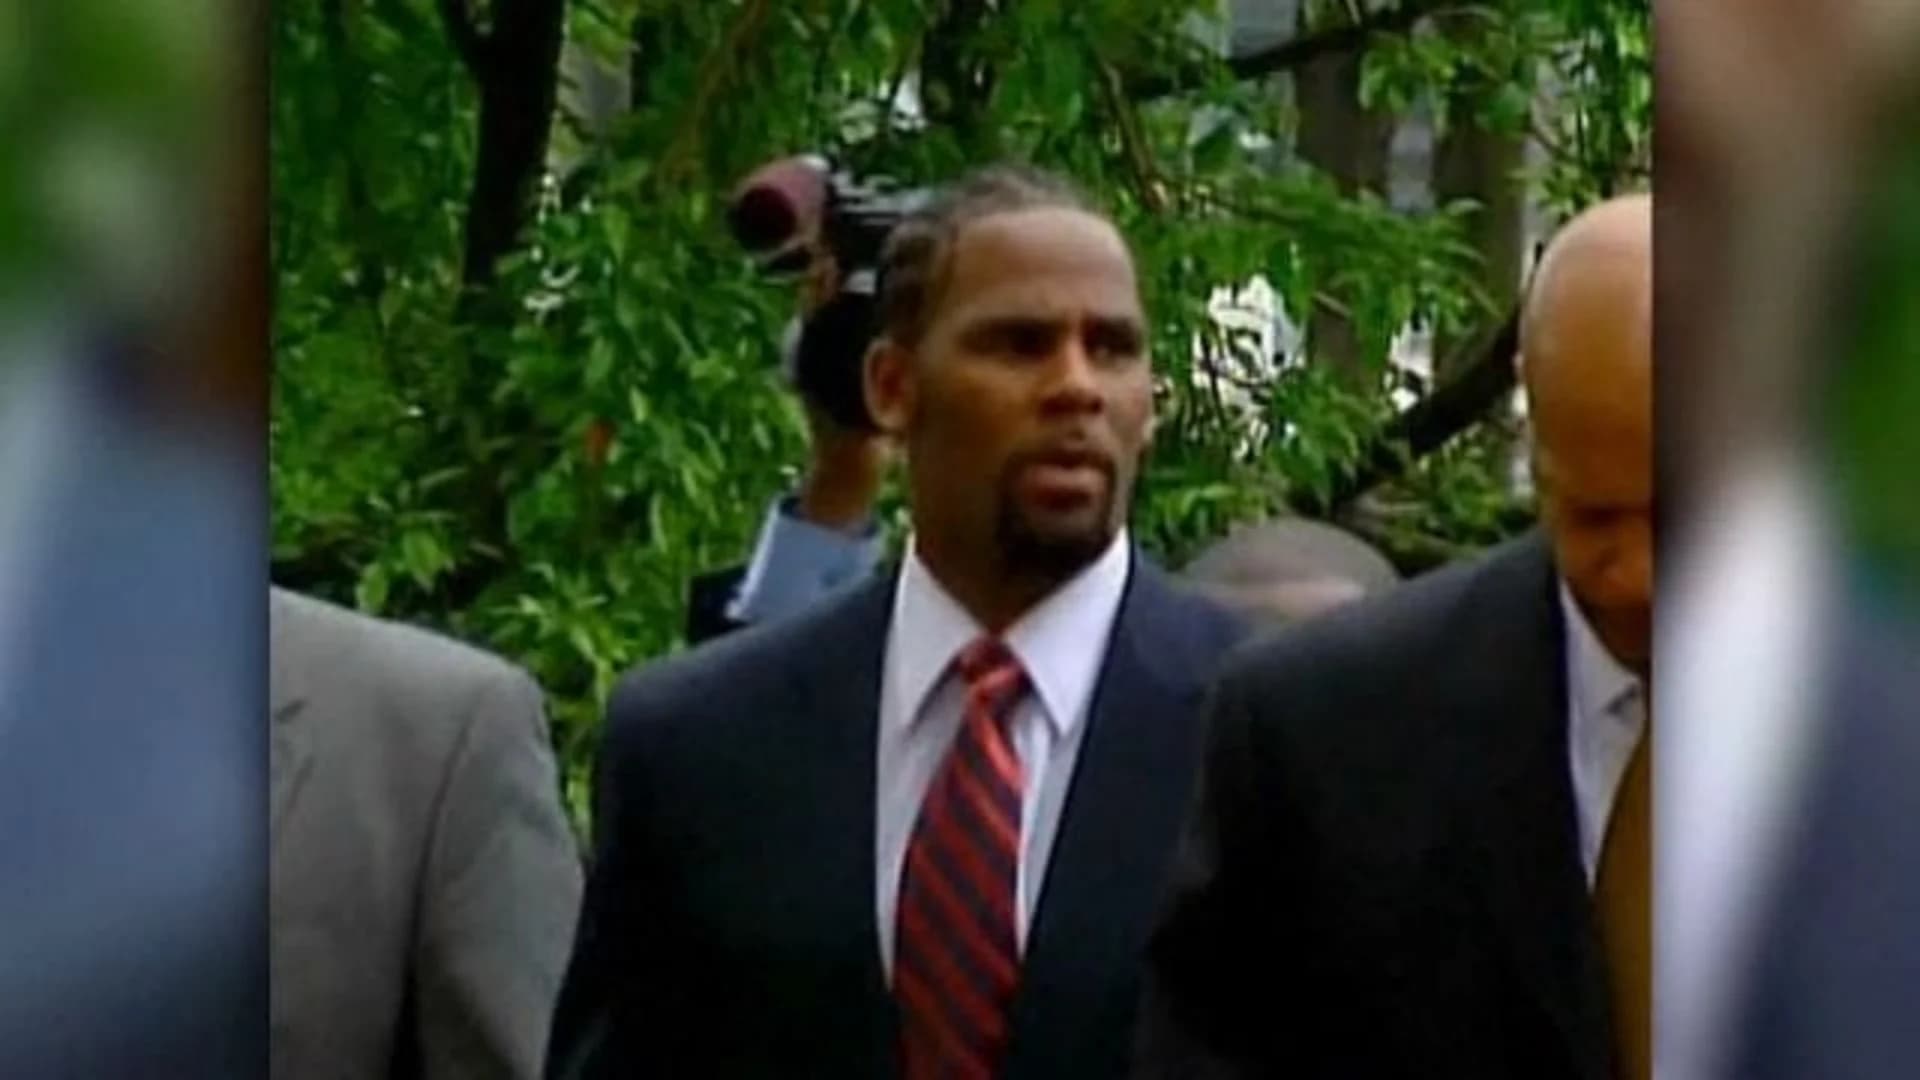 #N12BX: R. Kelly and Time’s Up